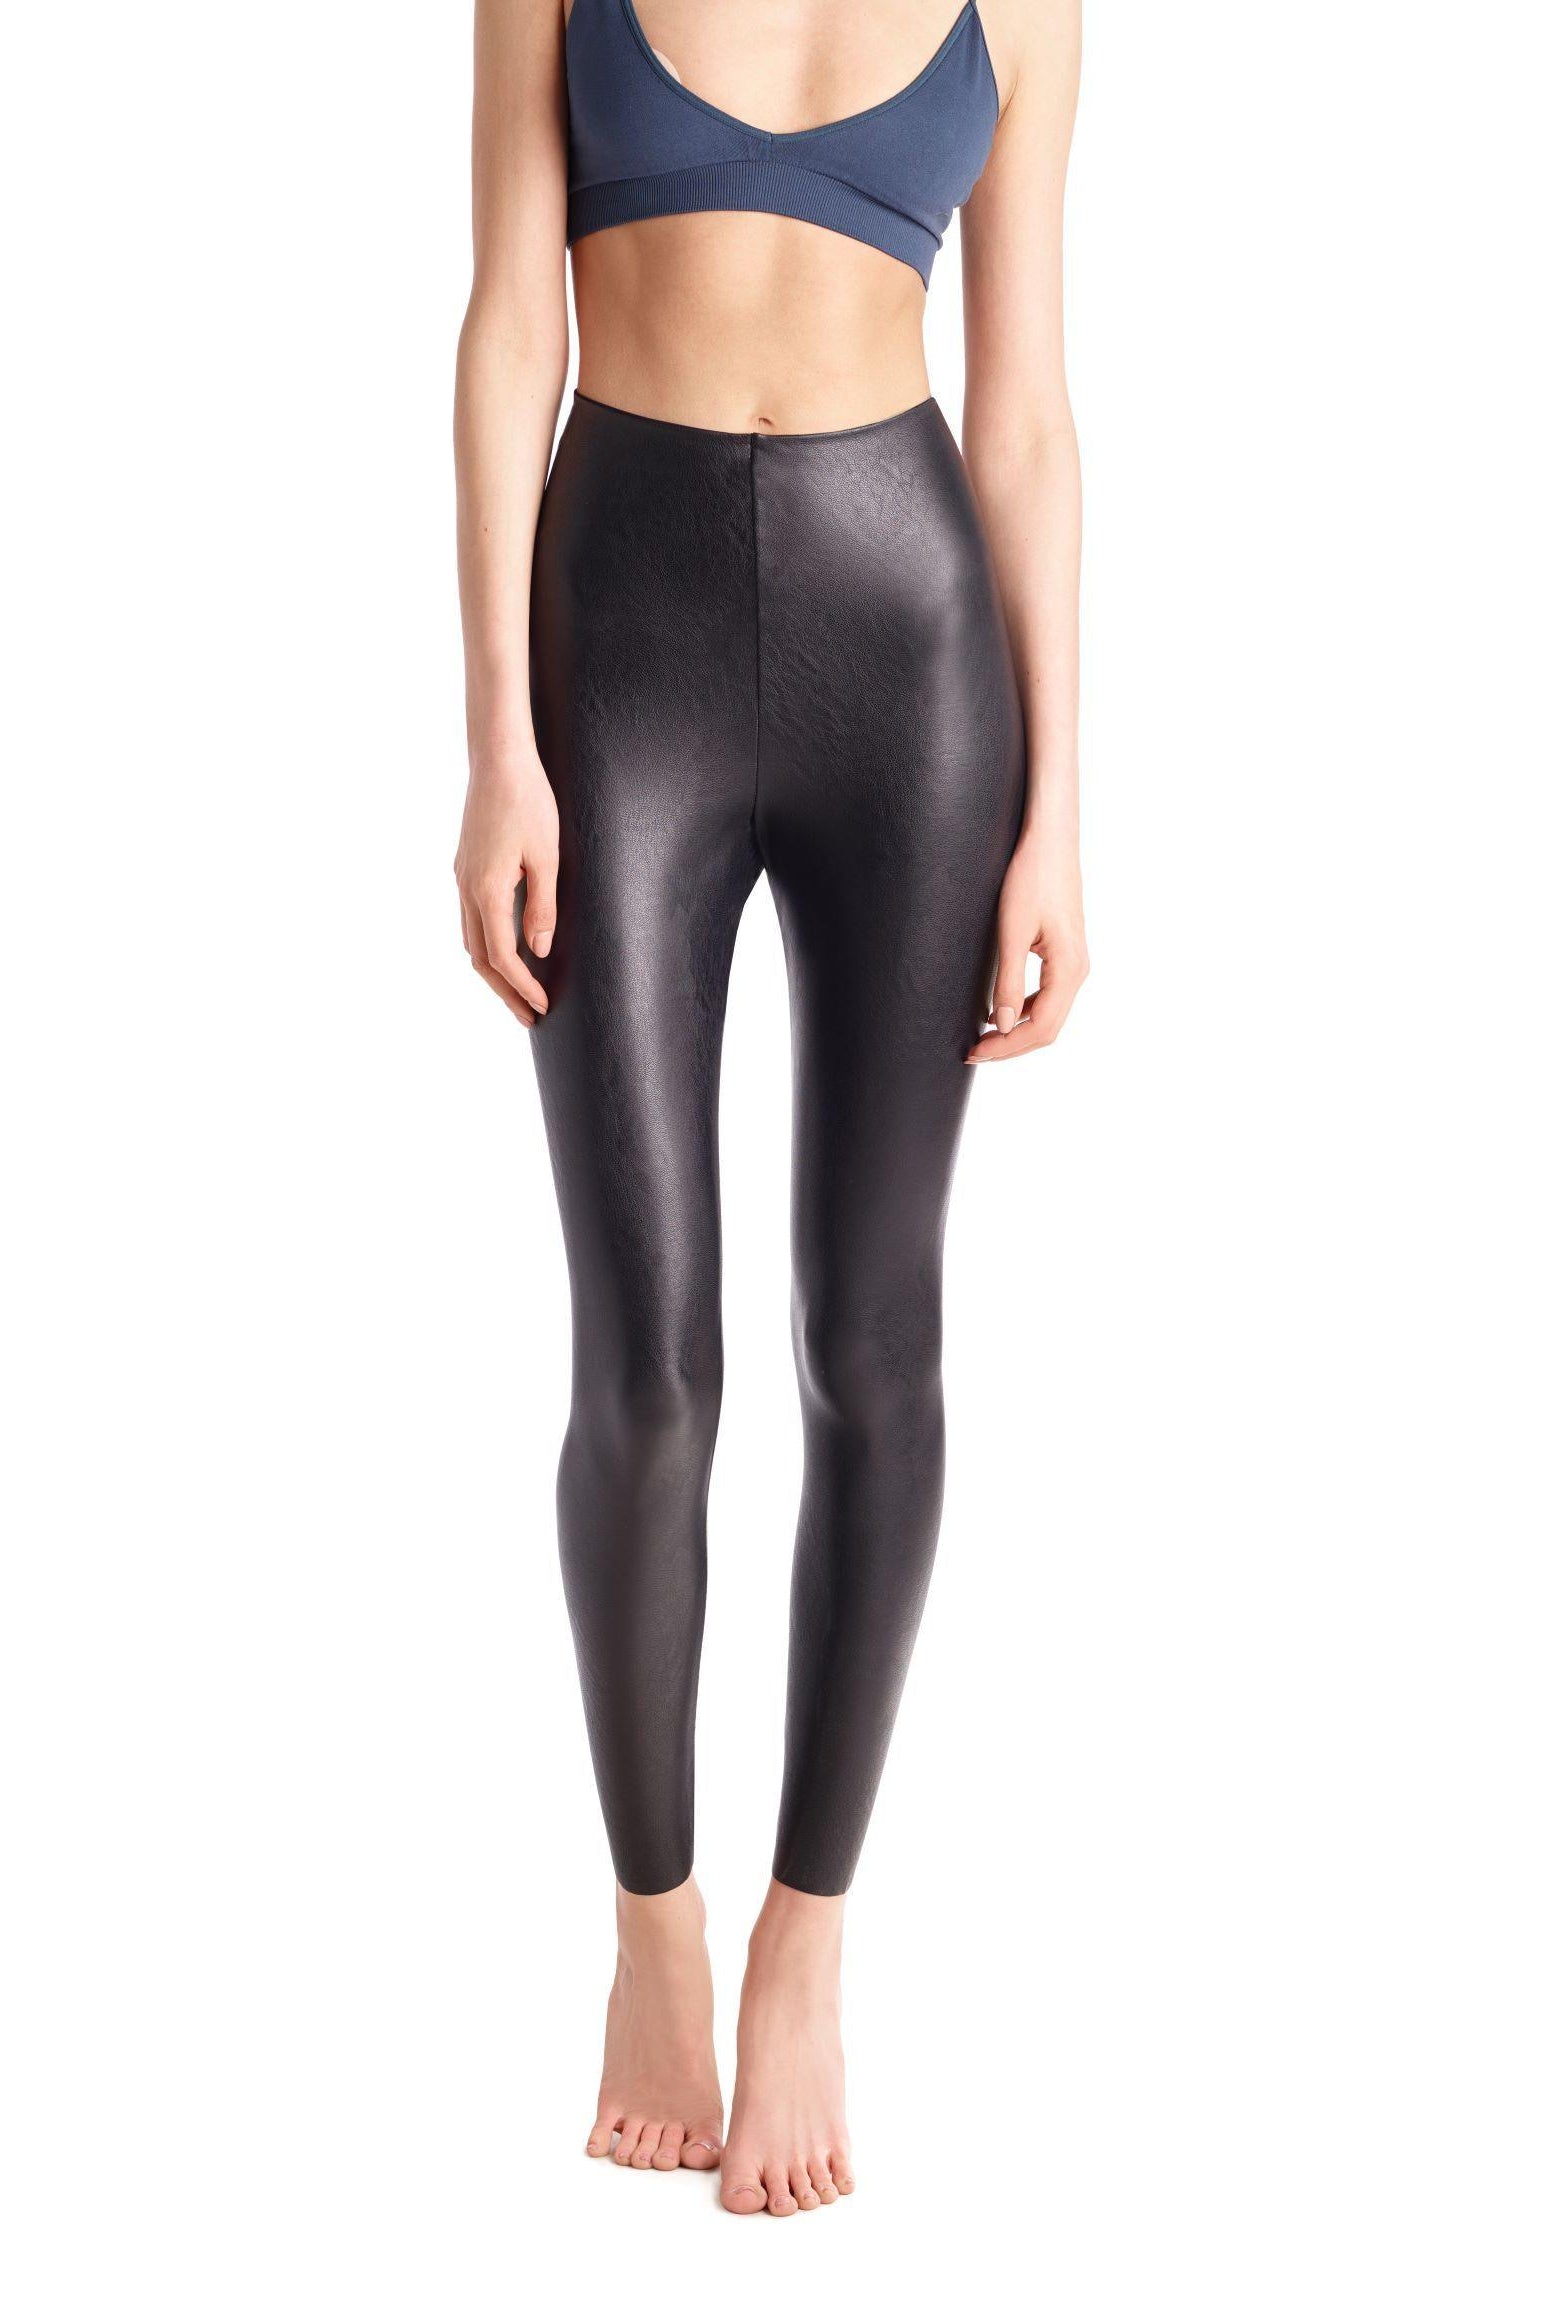 Commando Faux Leather Leggings Ethical Raleigh Boutique